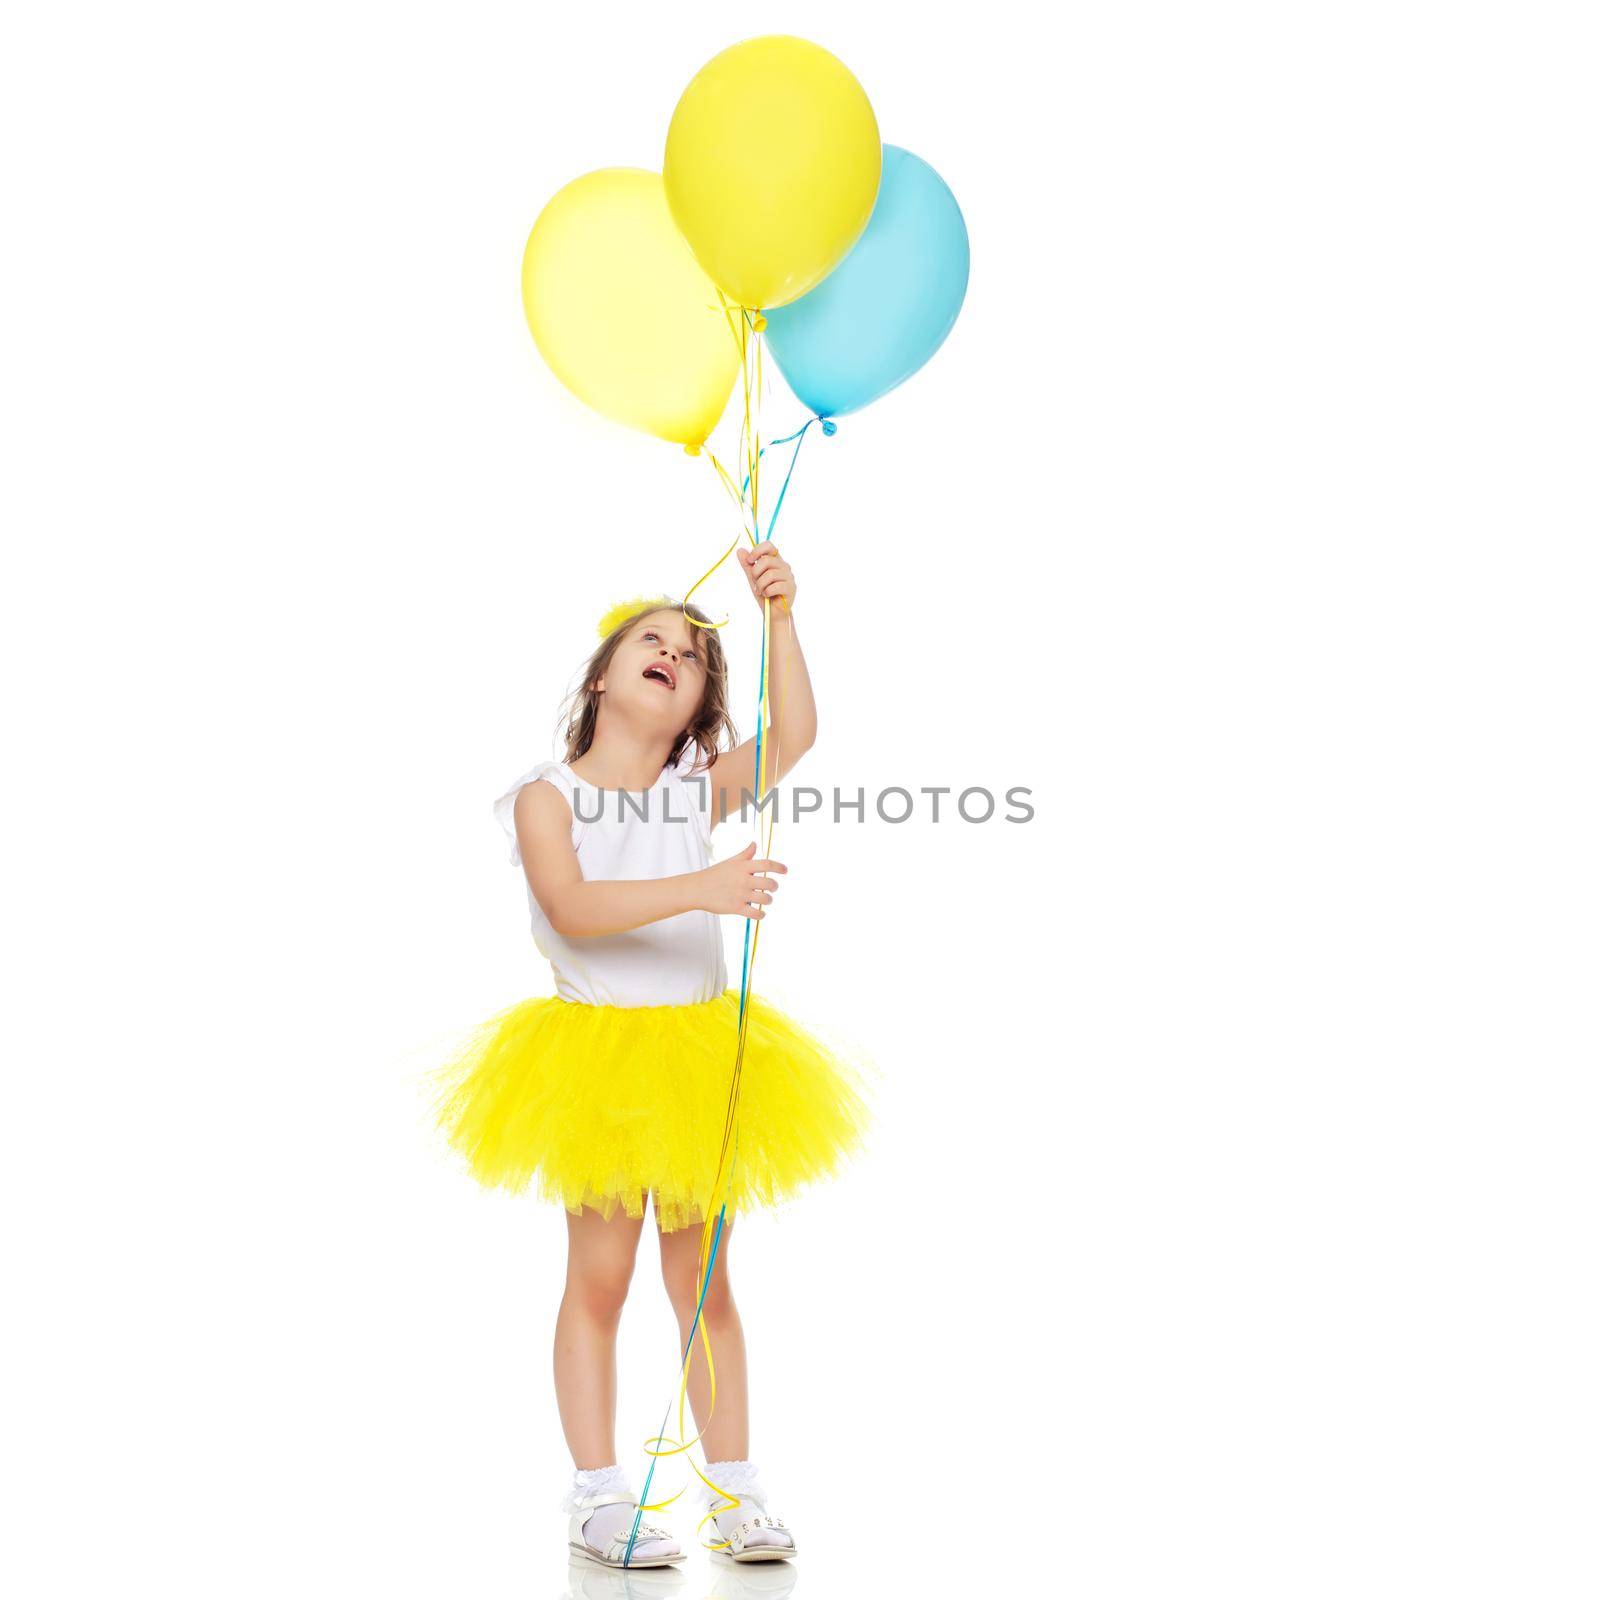 The little girl is full-length. The concept of family happiness, a child, childhood, play, beauty and fashion. isolated on white background